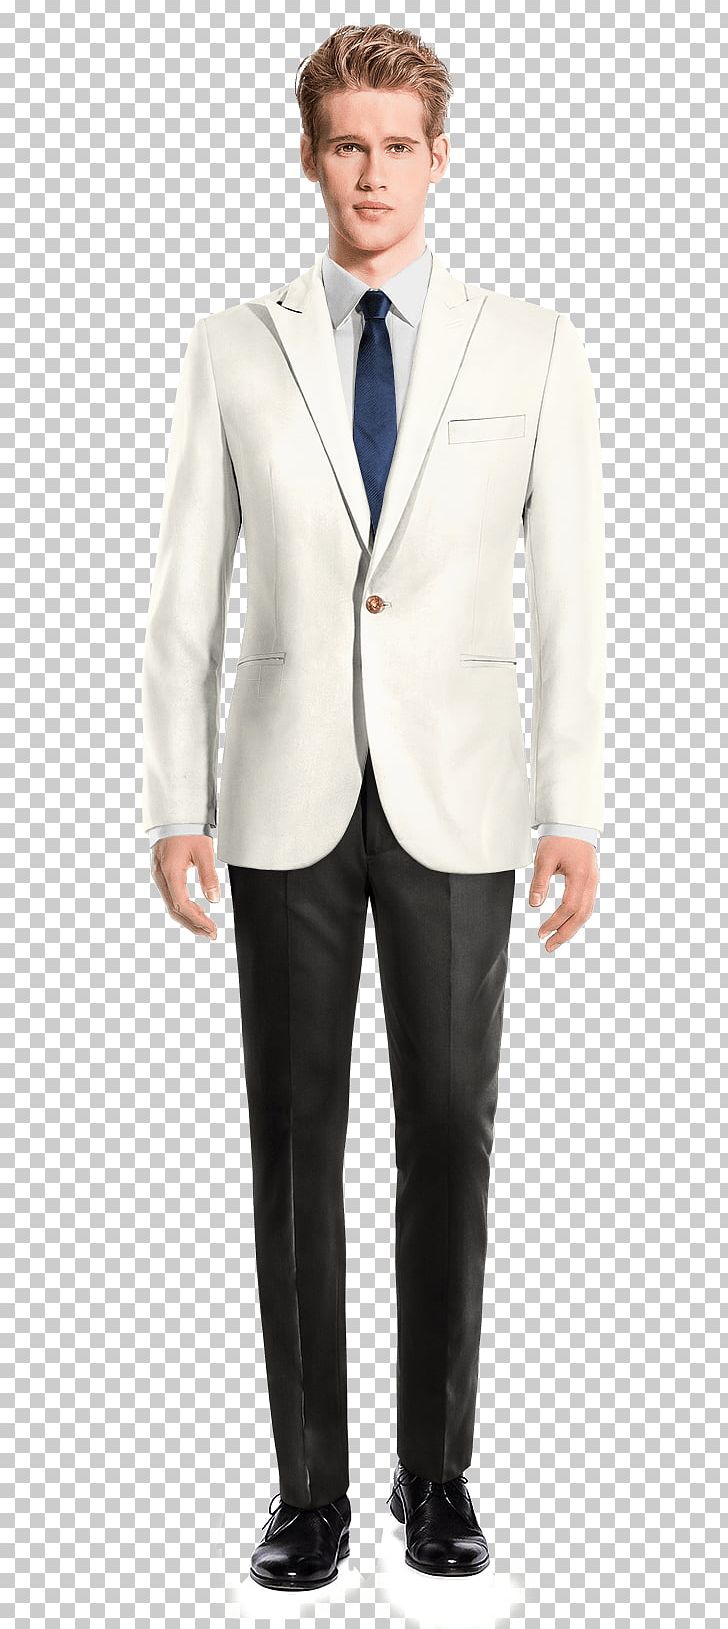 Mao Suit Pants Double-breasted Jacket PNG, Clipart, Blazer, Businessperson, Chino Cloth, Clothing, Coat Free PNG Download